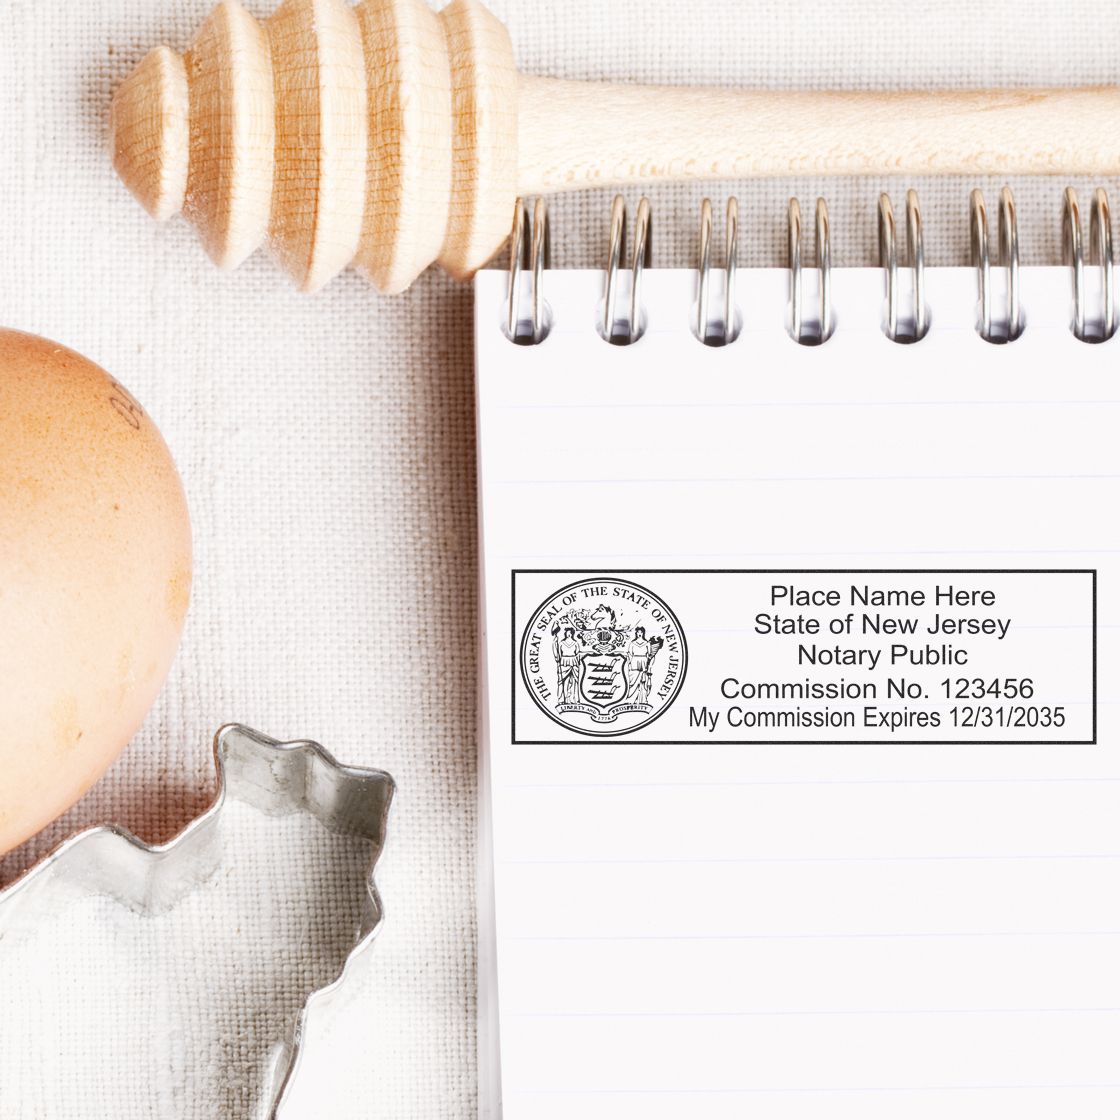 A photograph of the Wooden Handle New Jersey State Seal Notary Public Stamp stamp impression reveals a vivid, professional image of the on paper.